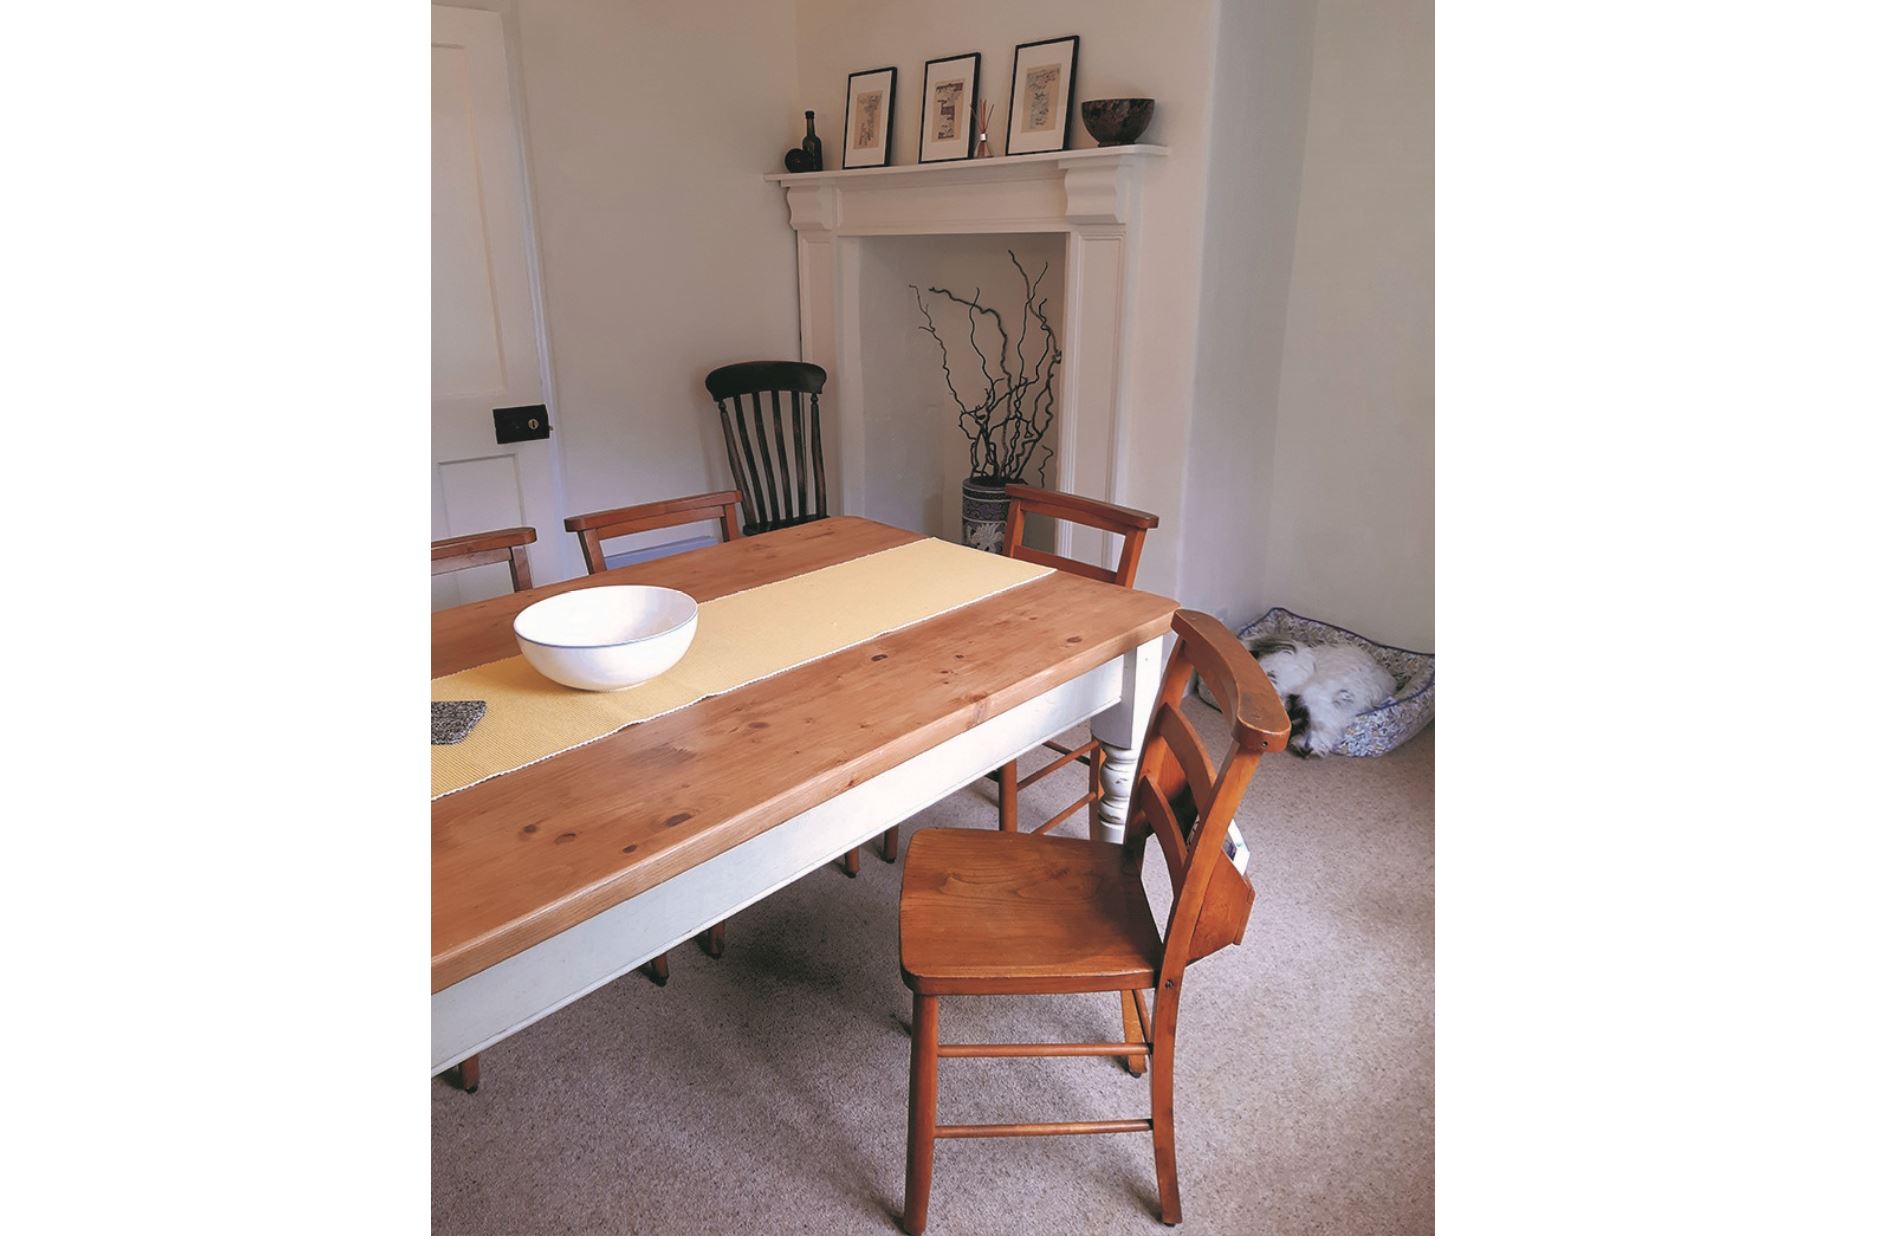 Antique Church Chairs Ideal For Kitchen Seating